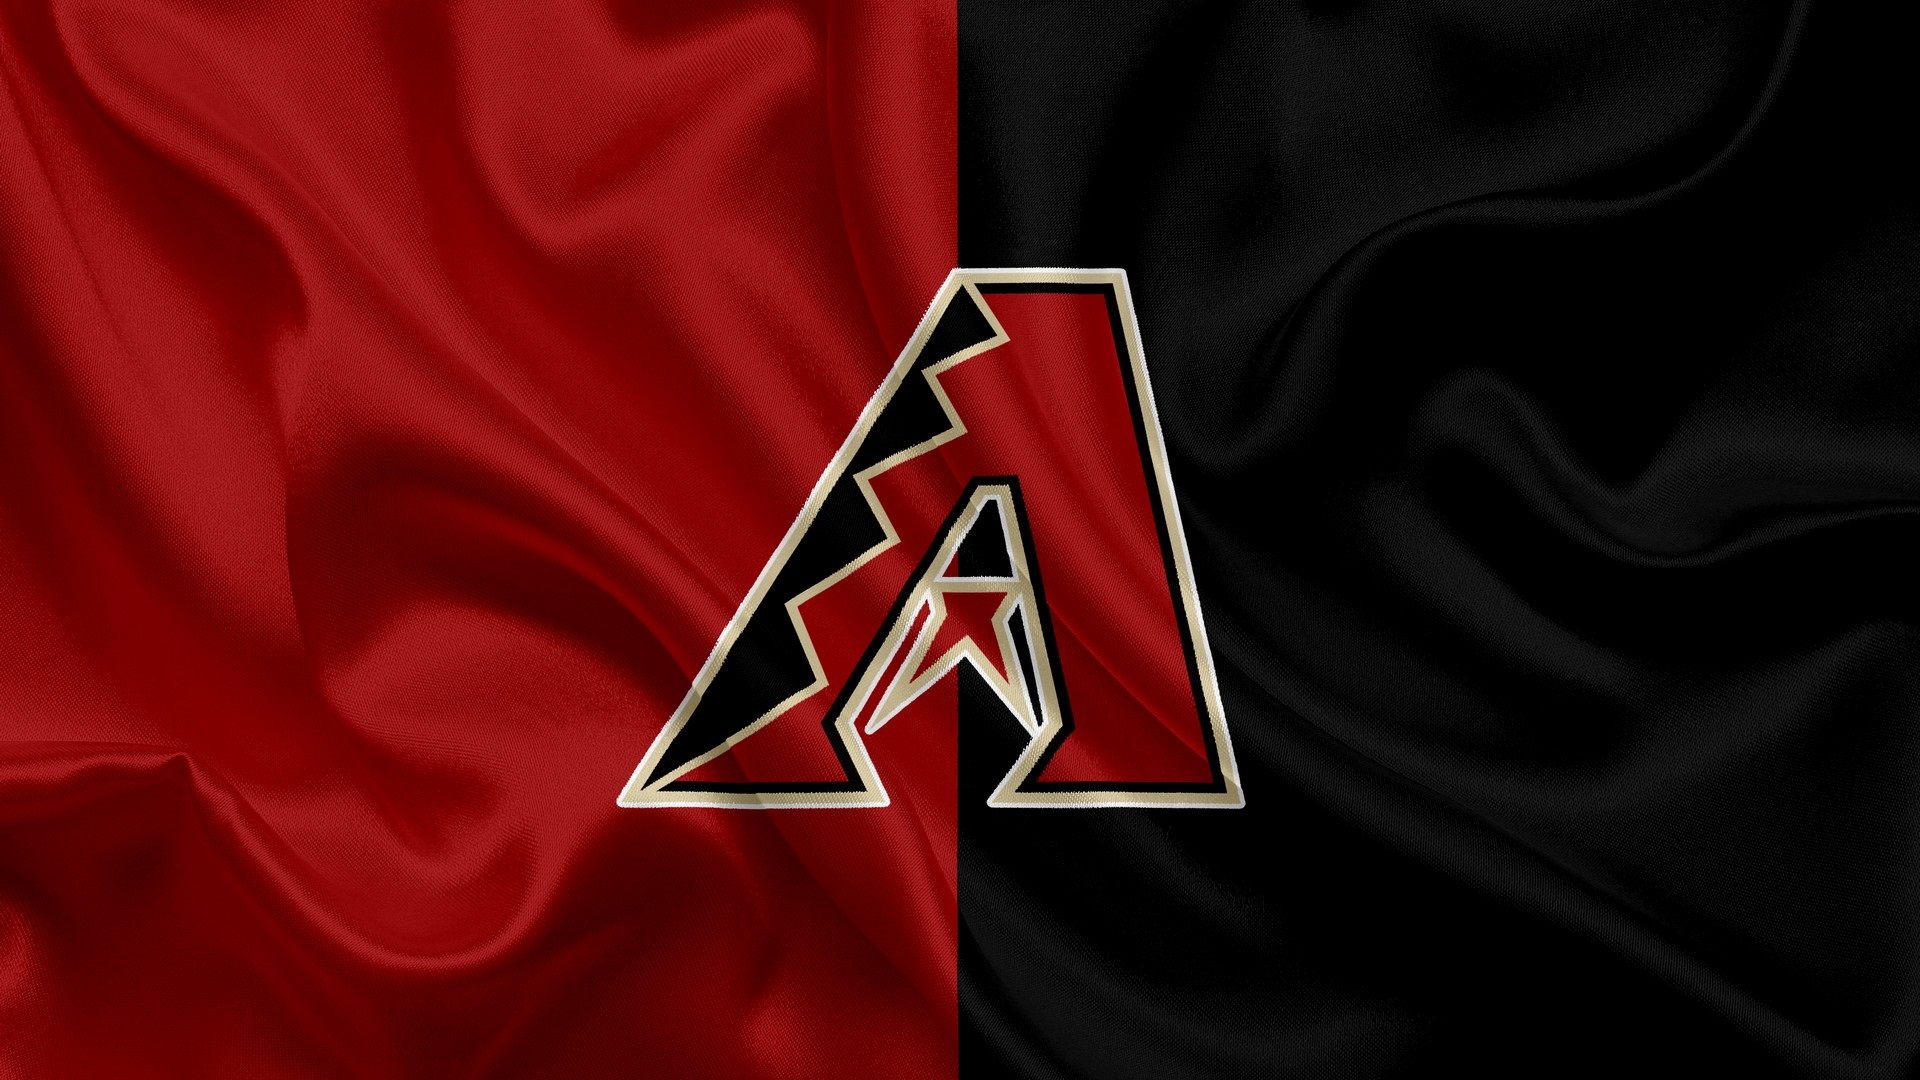 Wallpaper Desktop Arizona Diamondbacks HD With high-resolution 1920X1080 pixel. You can use this wallpaper for Mac Desktop Wallpaper, Laptop Screensavers, Android Wallpapers, Tablet or iPhone Home Screen and another mobile phone device